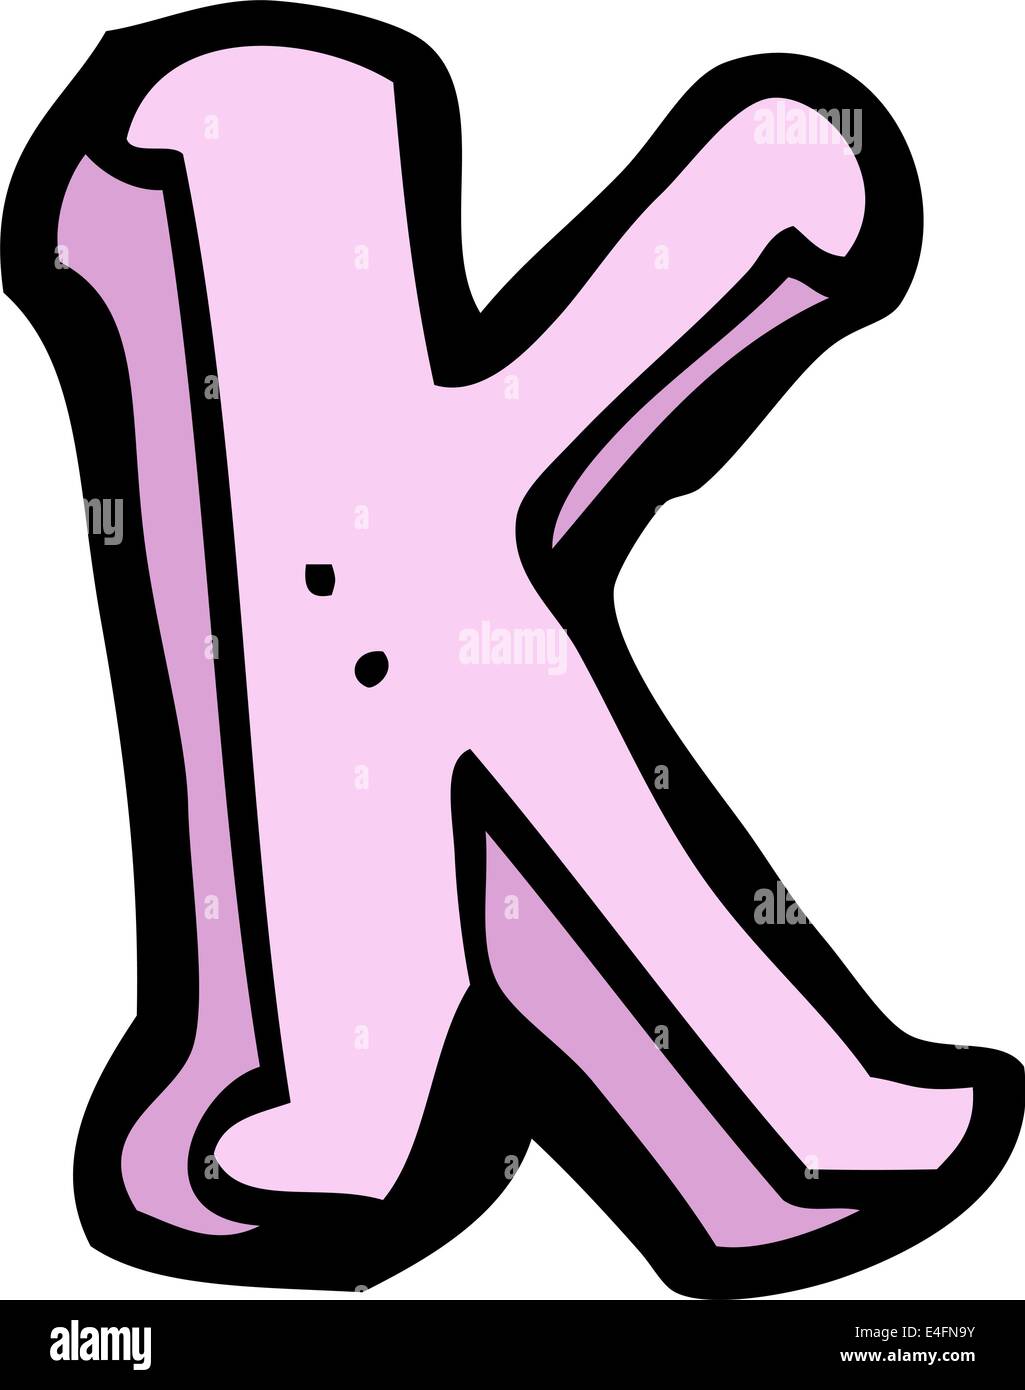 Cartoon Letter K Cut Out Stock Images & Pictures - Alamy